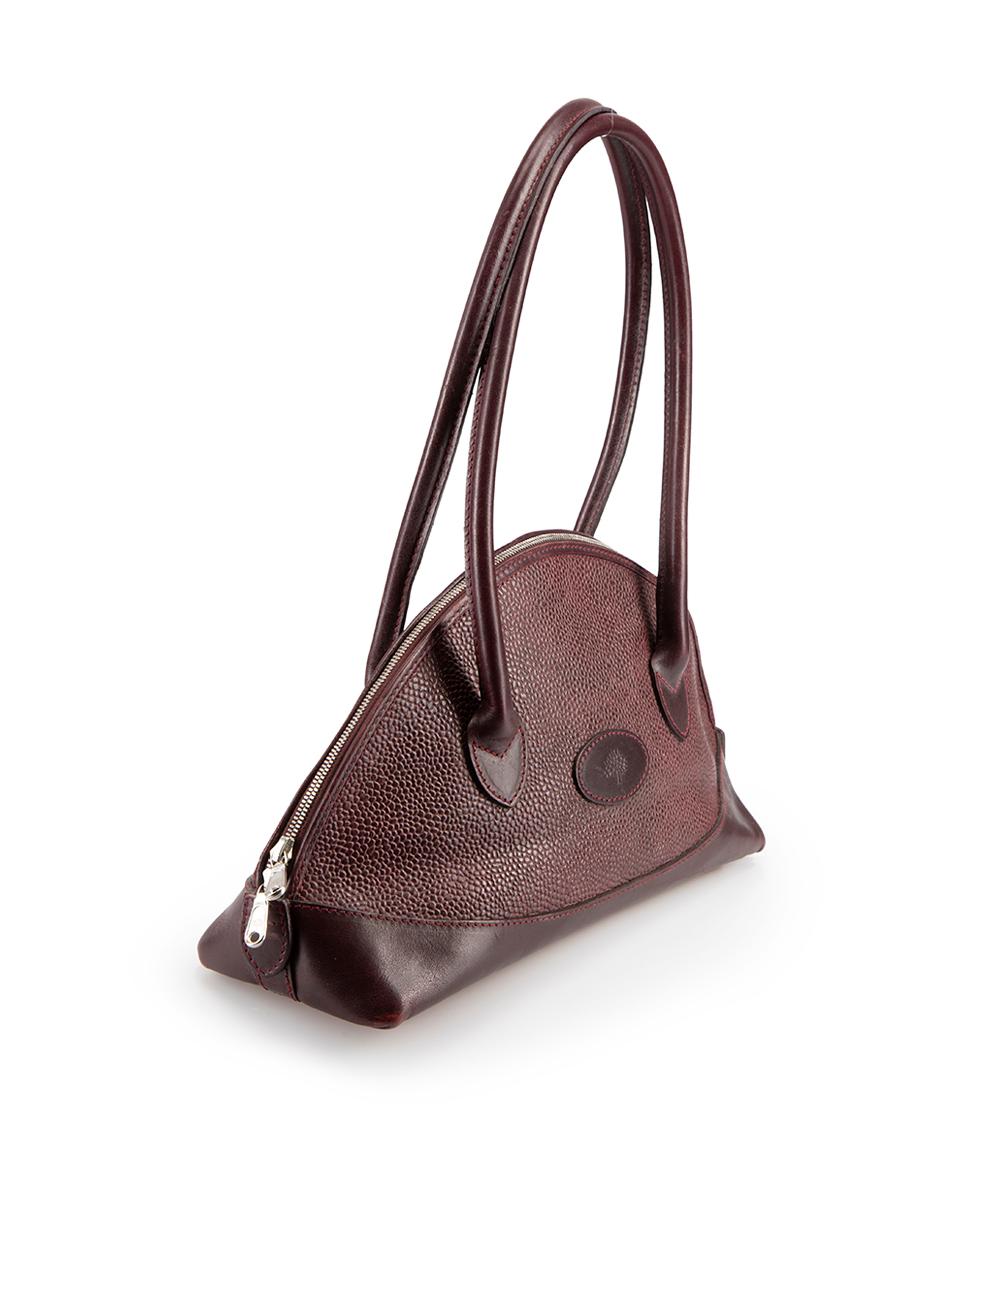 CONDITION is Very good. Minimal wear to bag is evident. Minimal wear to the base with scuff marks on this used Mulberry designer resale item. 



Details


Burgundy

Leather

Mini shoulder bag

Scotchgrain

2x Rolled top handles

Top double zip